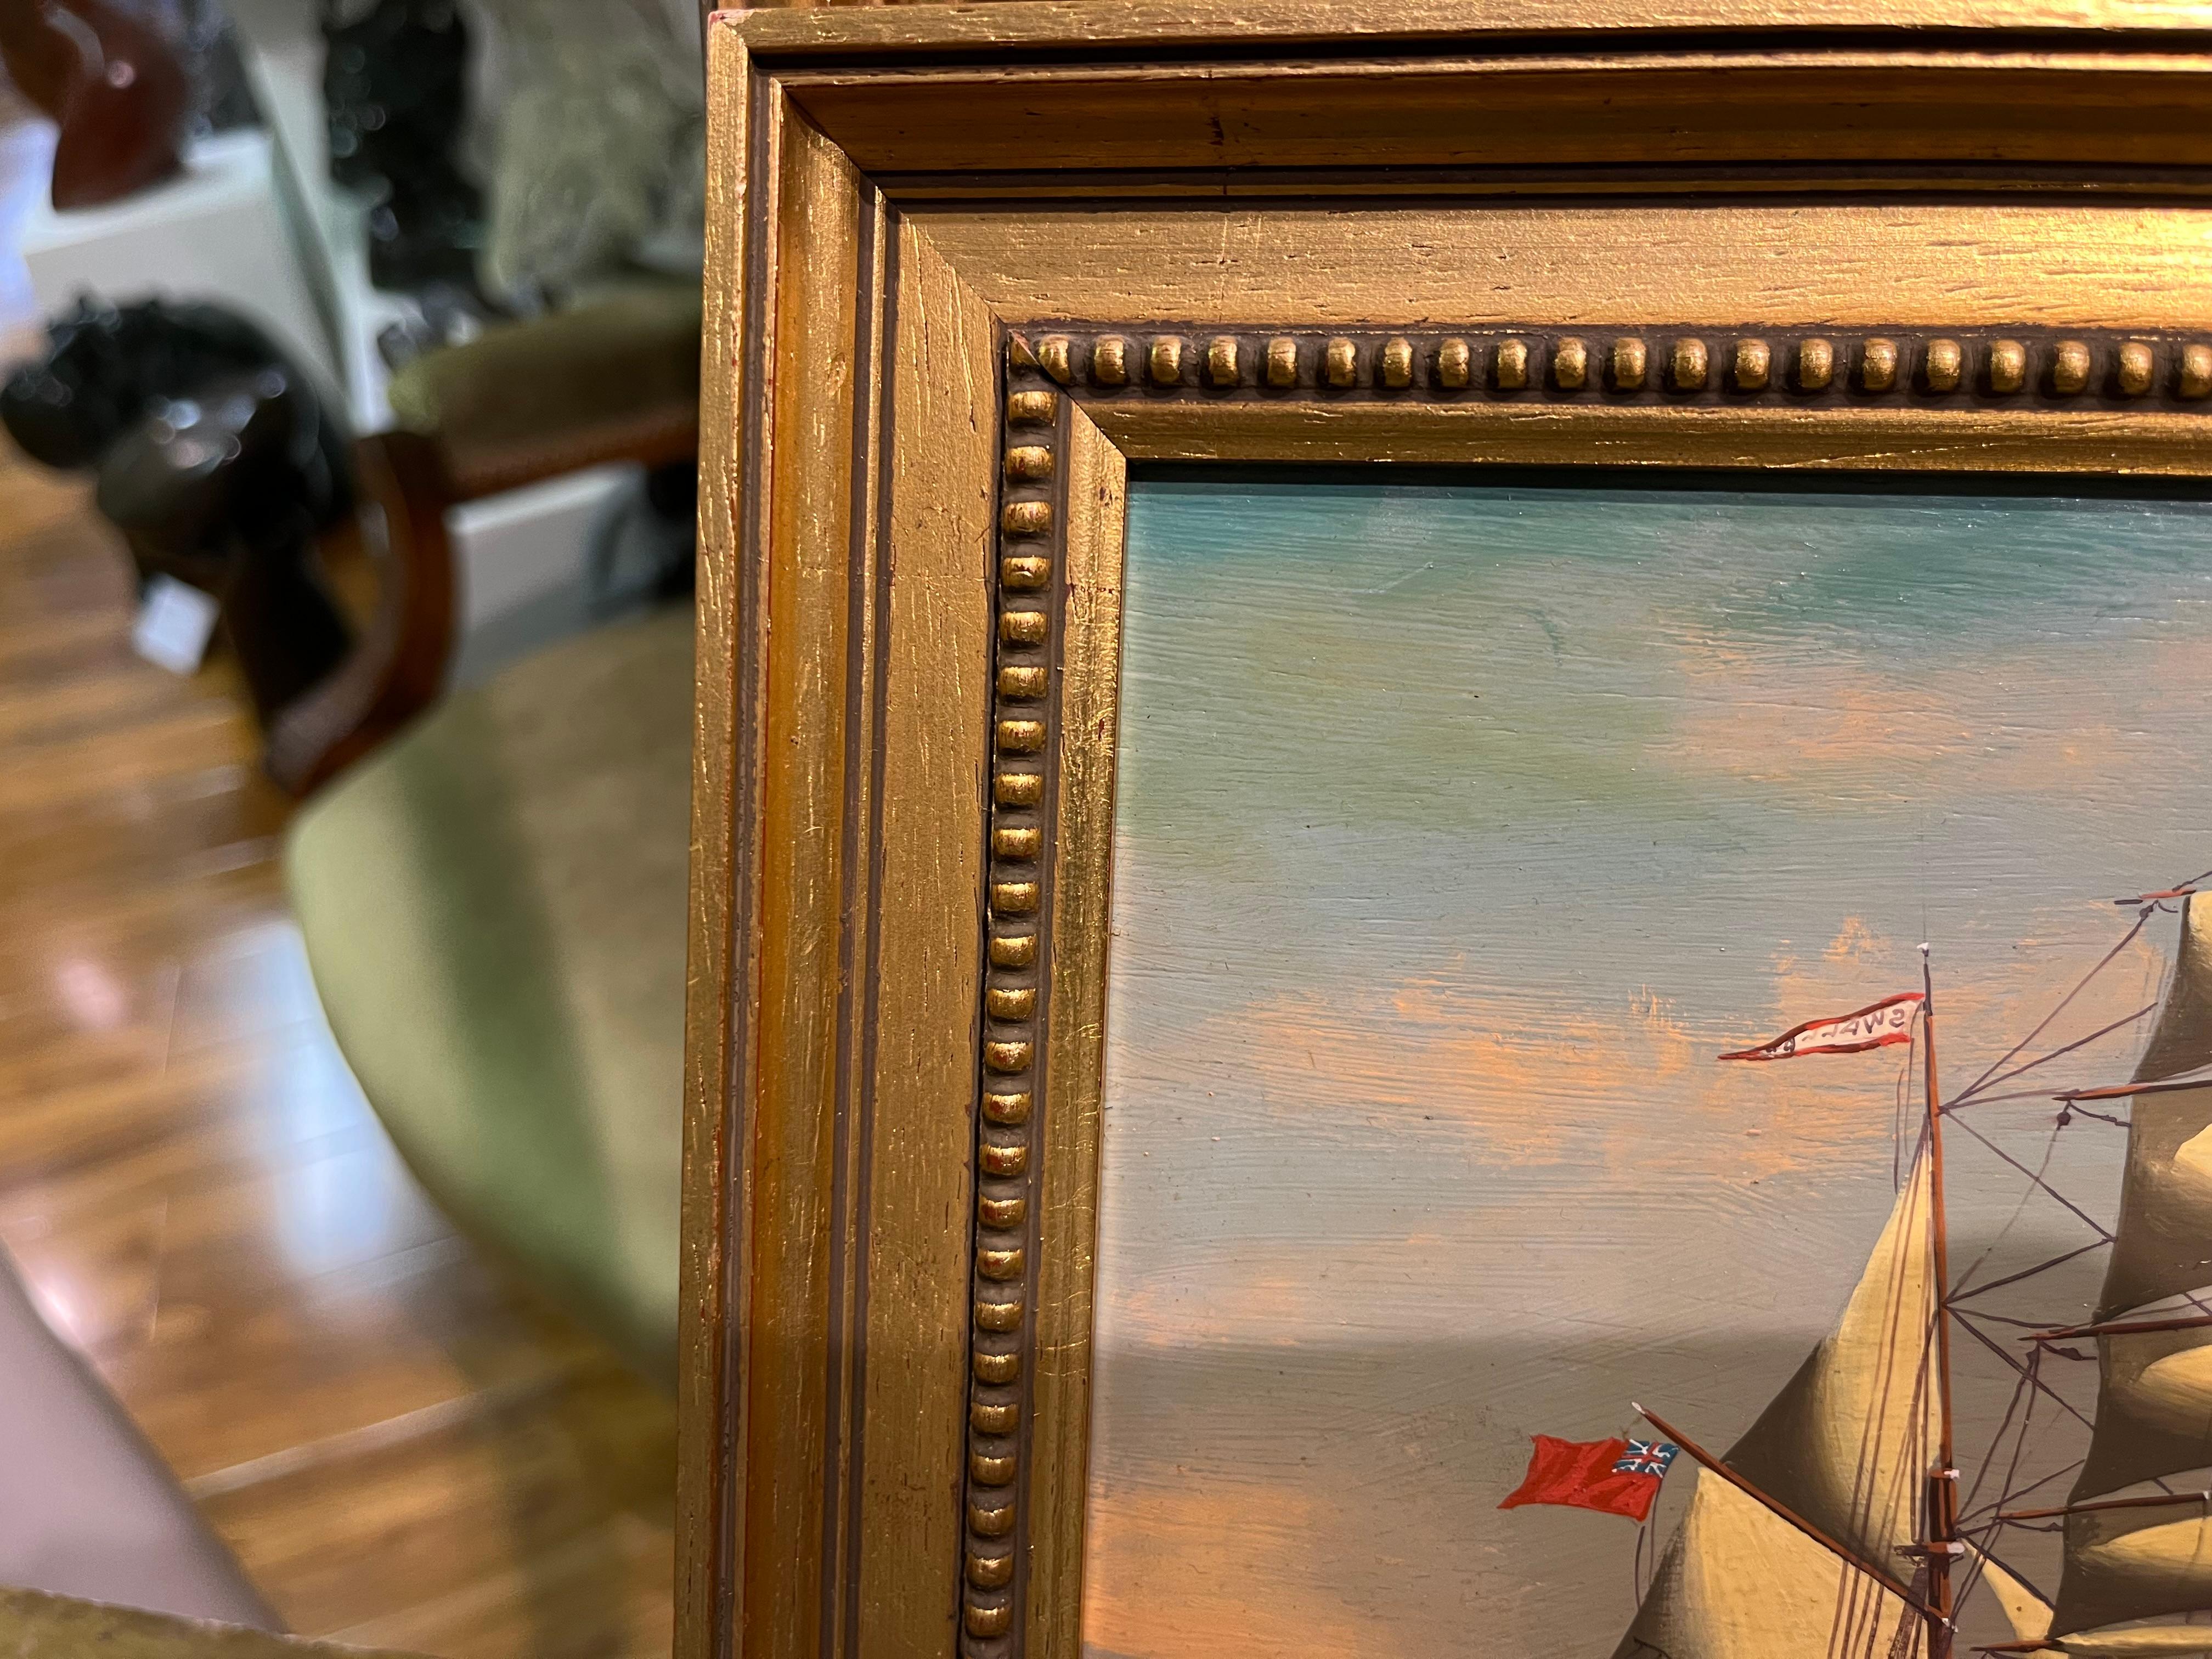 OIL PAINTING SMALL  SALVATORE COLACICCO (NAVY ADMIRALTY 20th CENTURY

Very good condition for age , (see pictures)

FINE RARE MARTINE PAINTING ORIGINAL

20th Century OLD MASTER STYLE OIL PAINTING GOLD GILT FRAME

By Similar $3,000 Premier